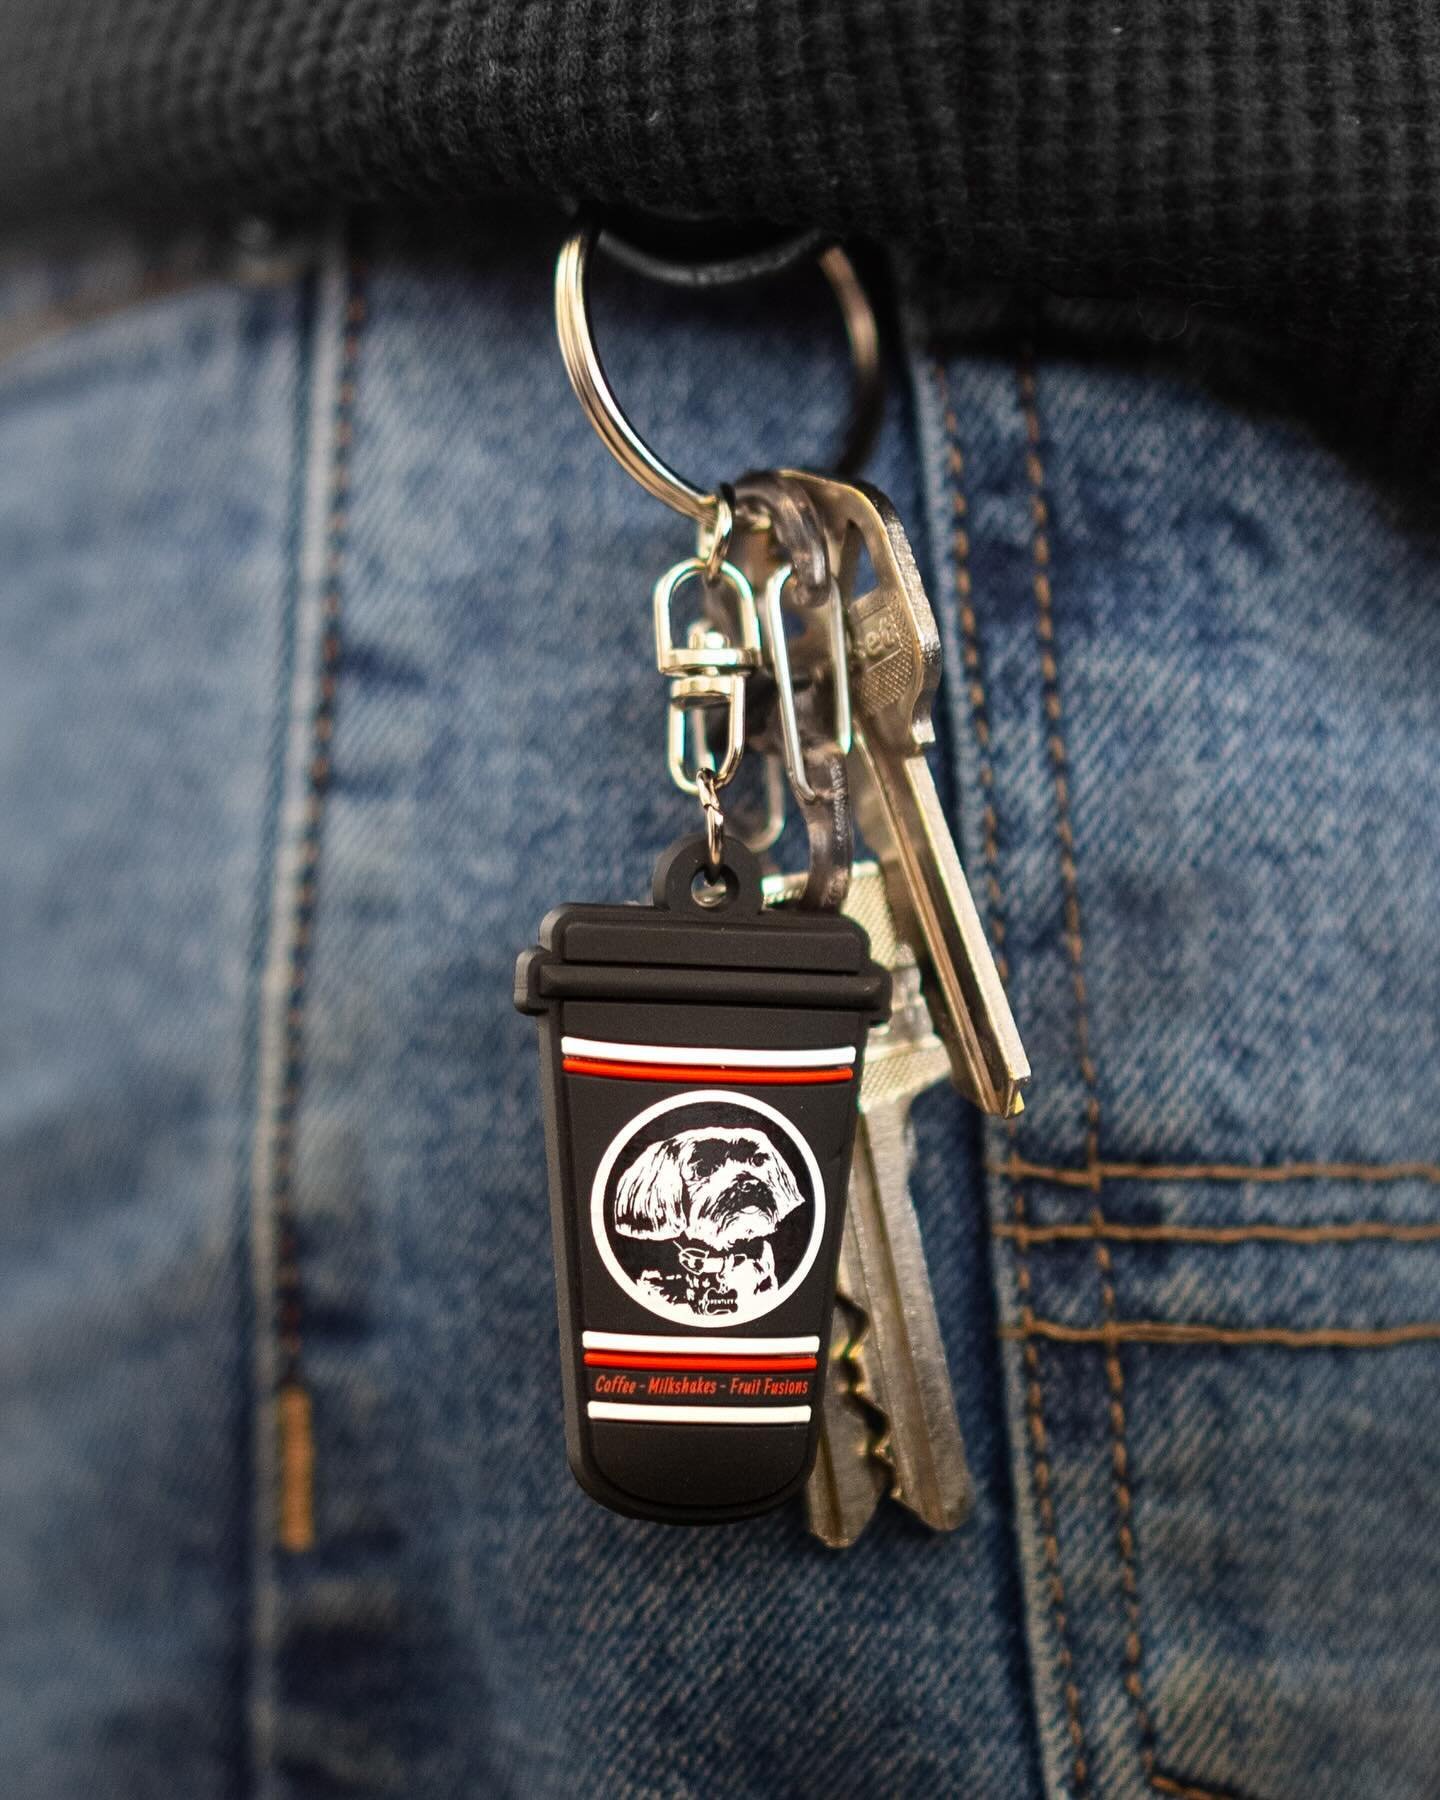 FREE LIMITED EDITION BENTLEY&rsquo;S COFFEE CUP KEYCHAIN 🔑🚘☕️🐶

Thursday, April 25th get this keychain FREE with each 16oz or 24oz drink purchased!!! 🔐🖤

We ordered 6,000 keychains so they should last most of the day!! Don&rsquo;t be shy afterno